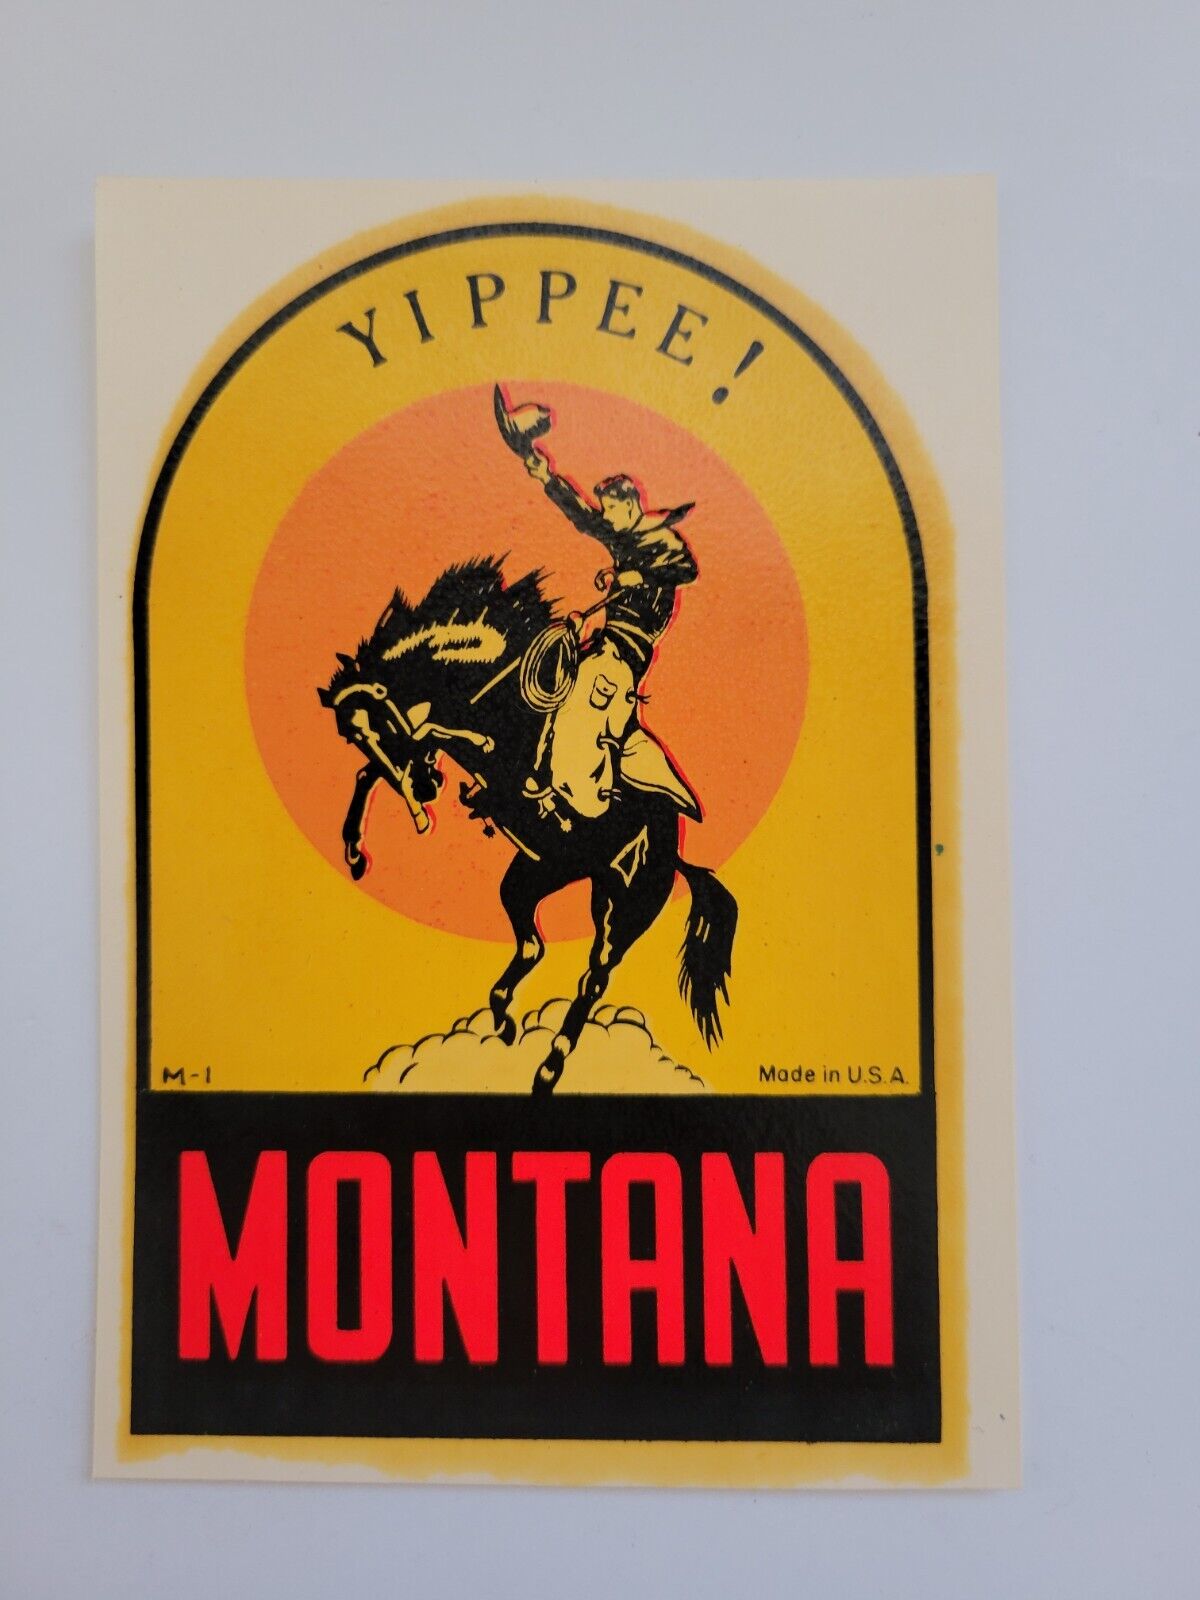 Vintage Montana Cowboy Rodeo Travel Decal Water Transfer Sticker YIPPEE NOS